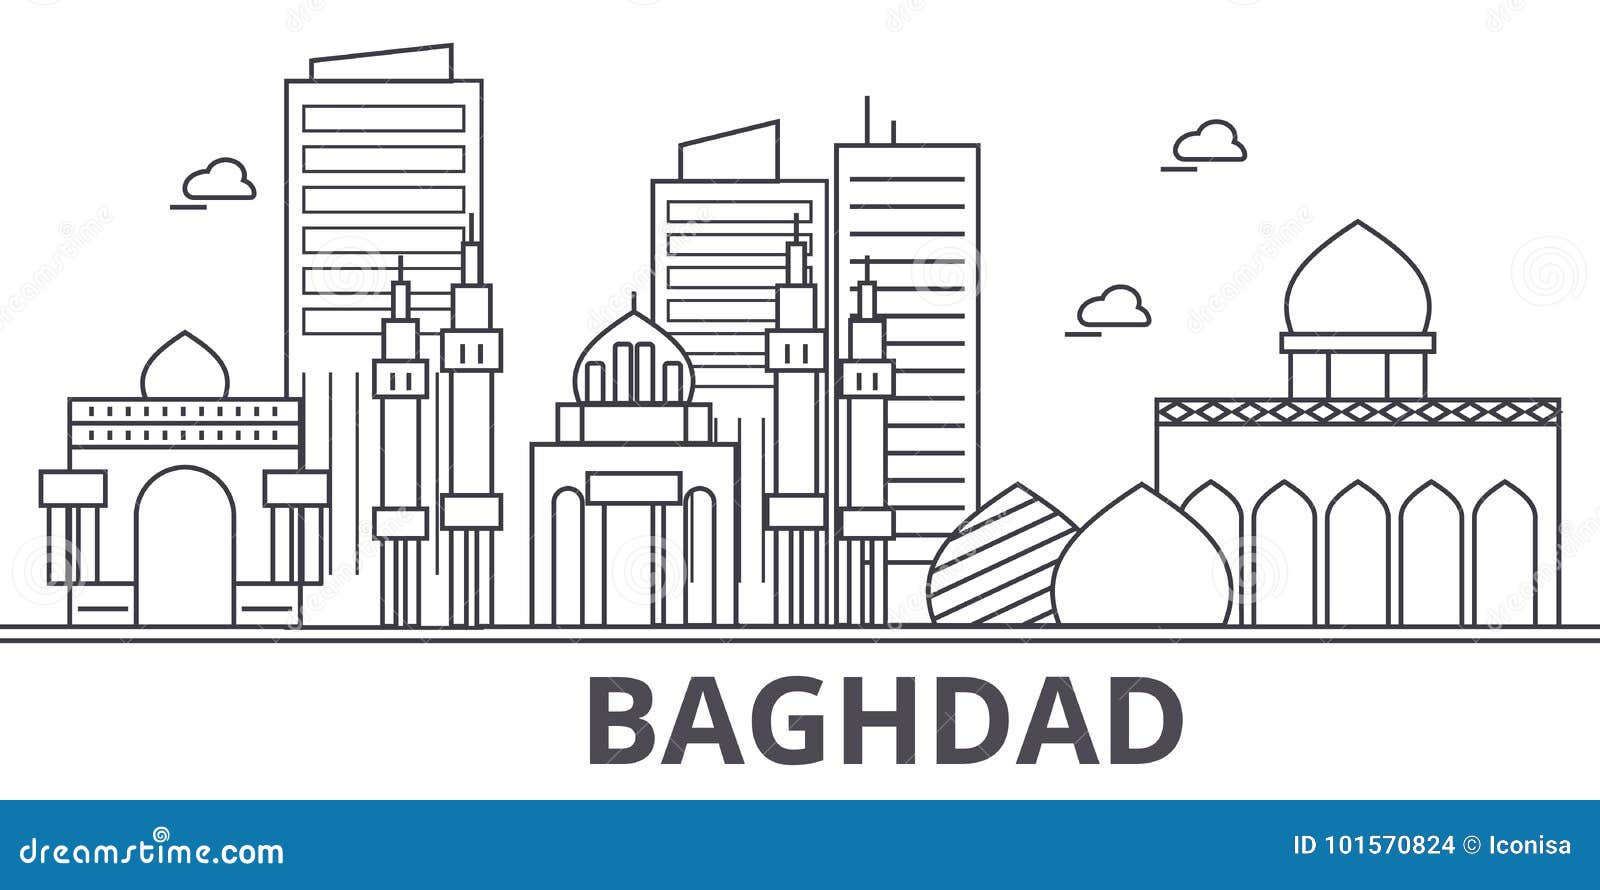 baghdad architecture line skyline . linear  cityscape with famous landmarks, city sights,  icons